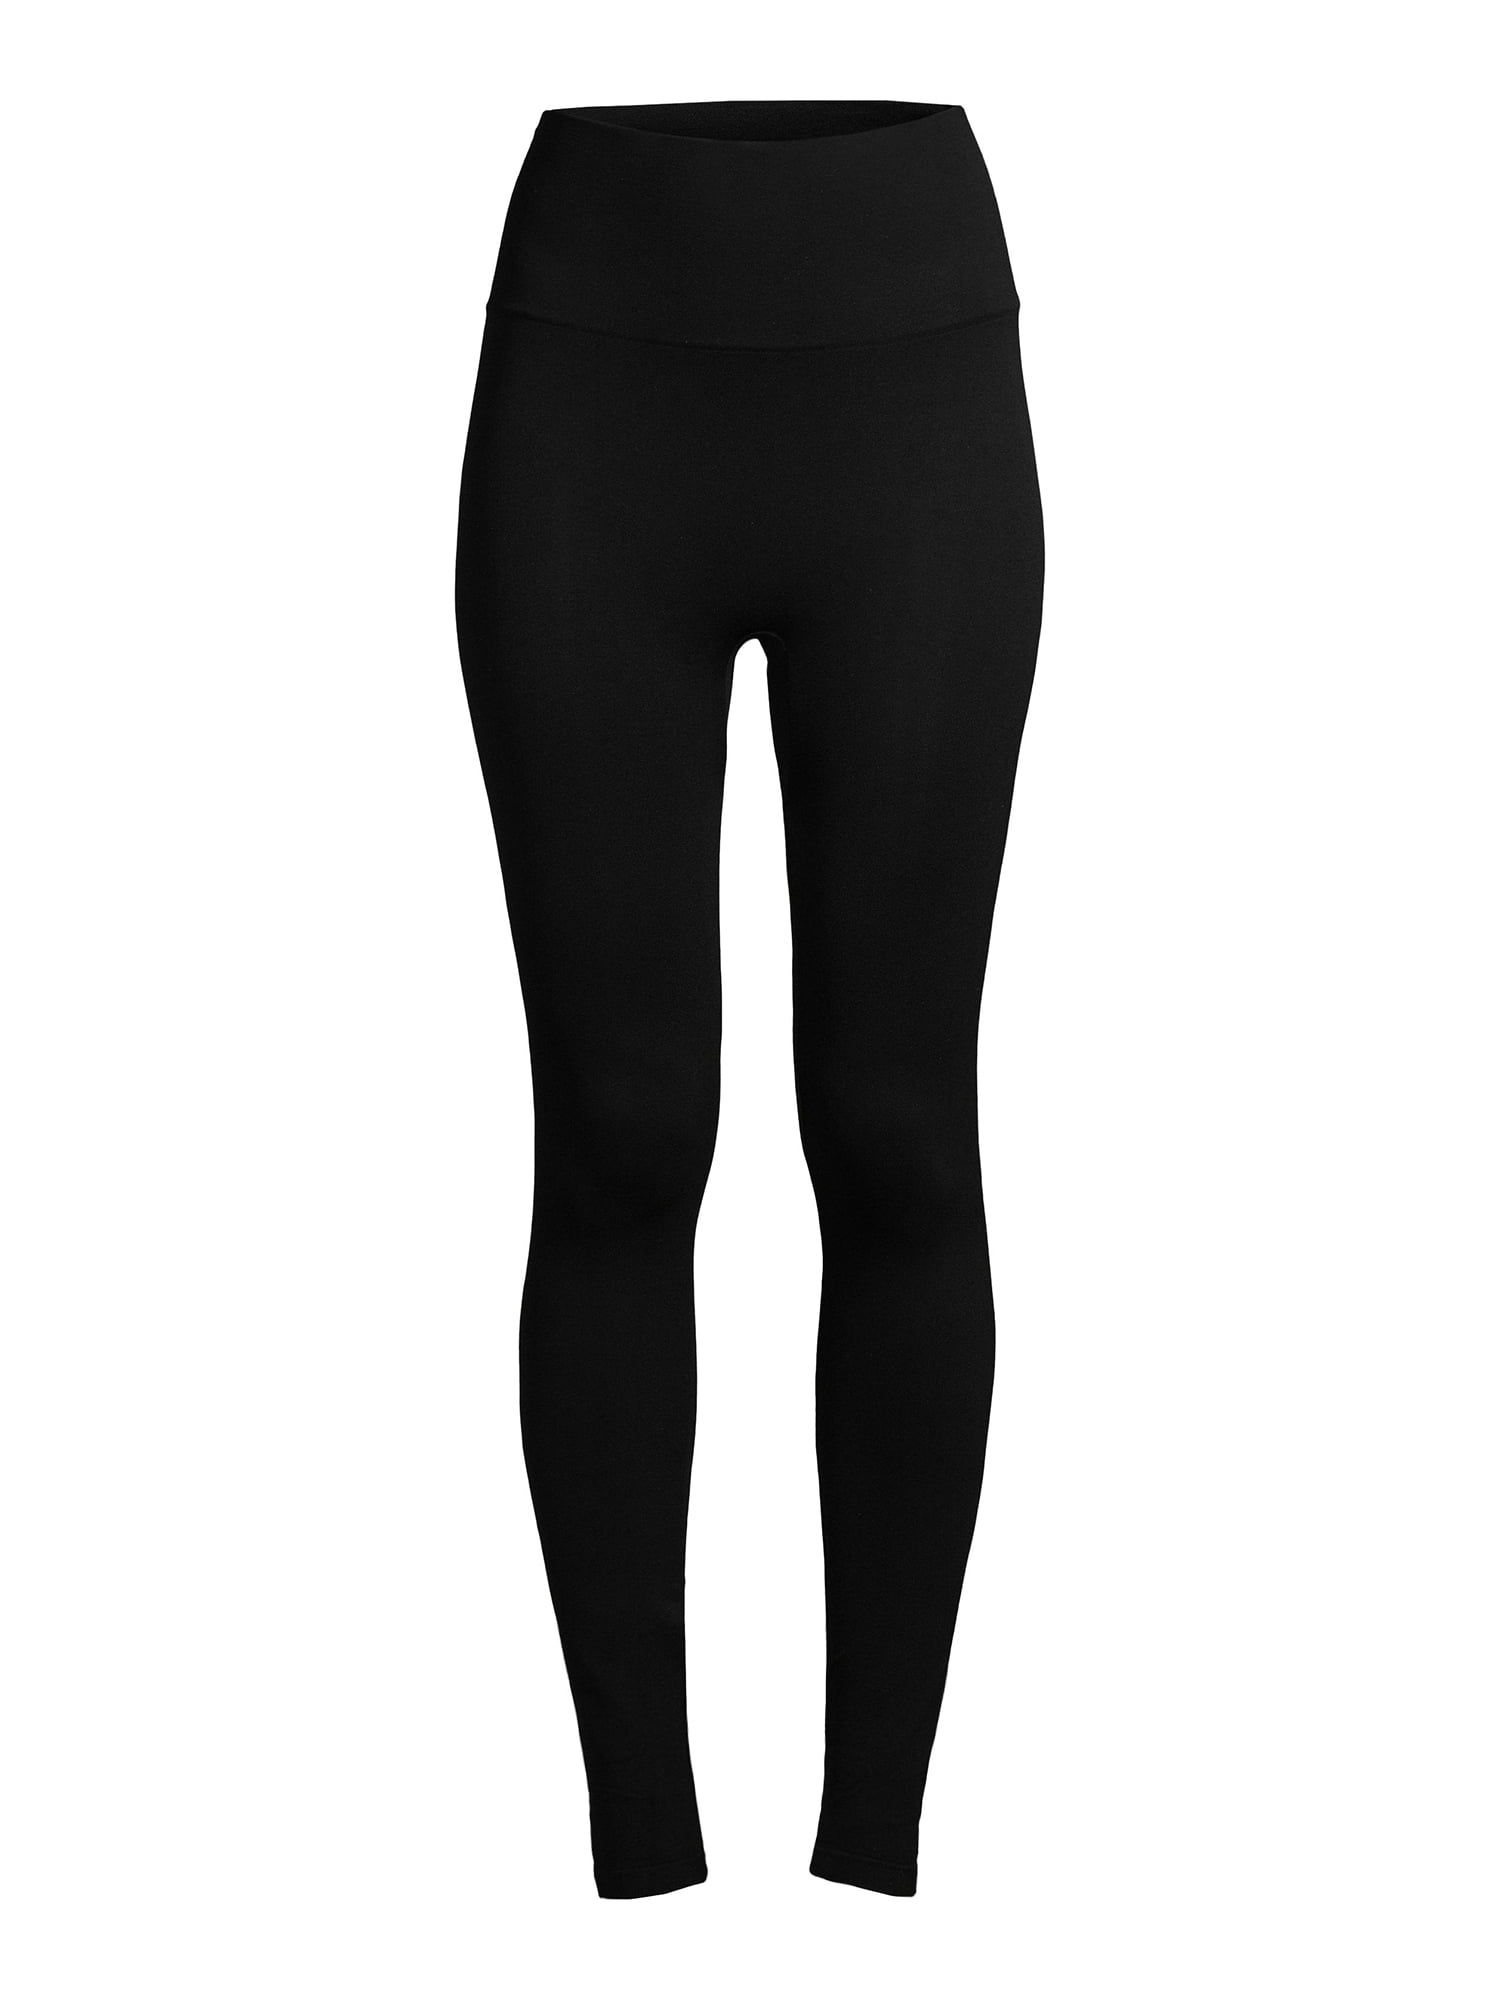 15 Black Workout Leggings That Are Cute And Simple - Society19 UK